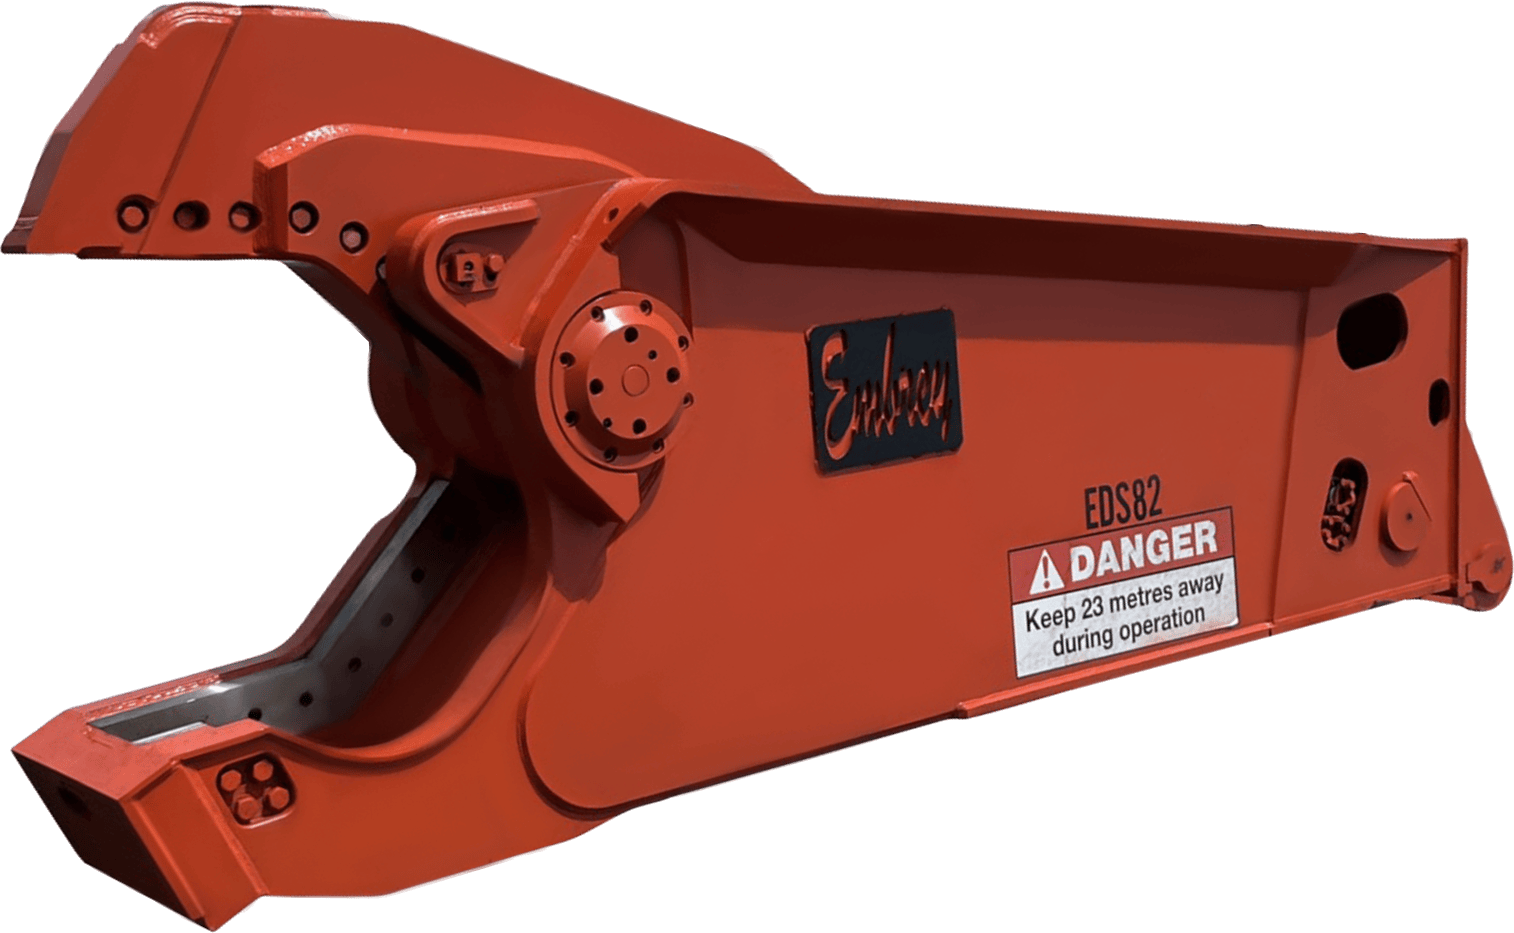 EDS82-shears-large Embrey Attachments - Demolition Shears